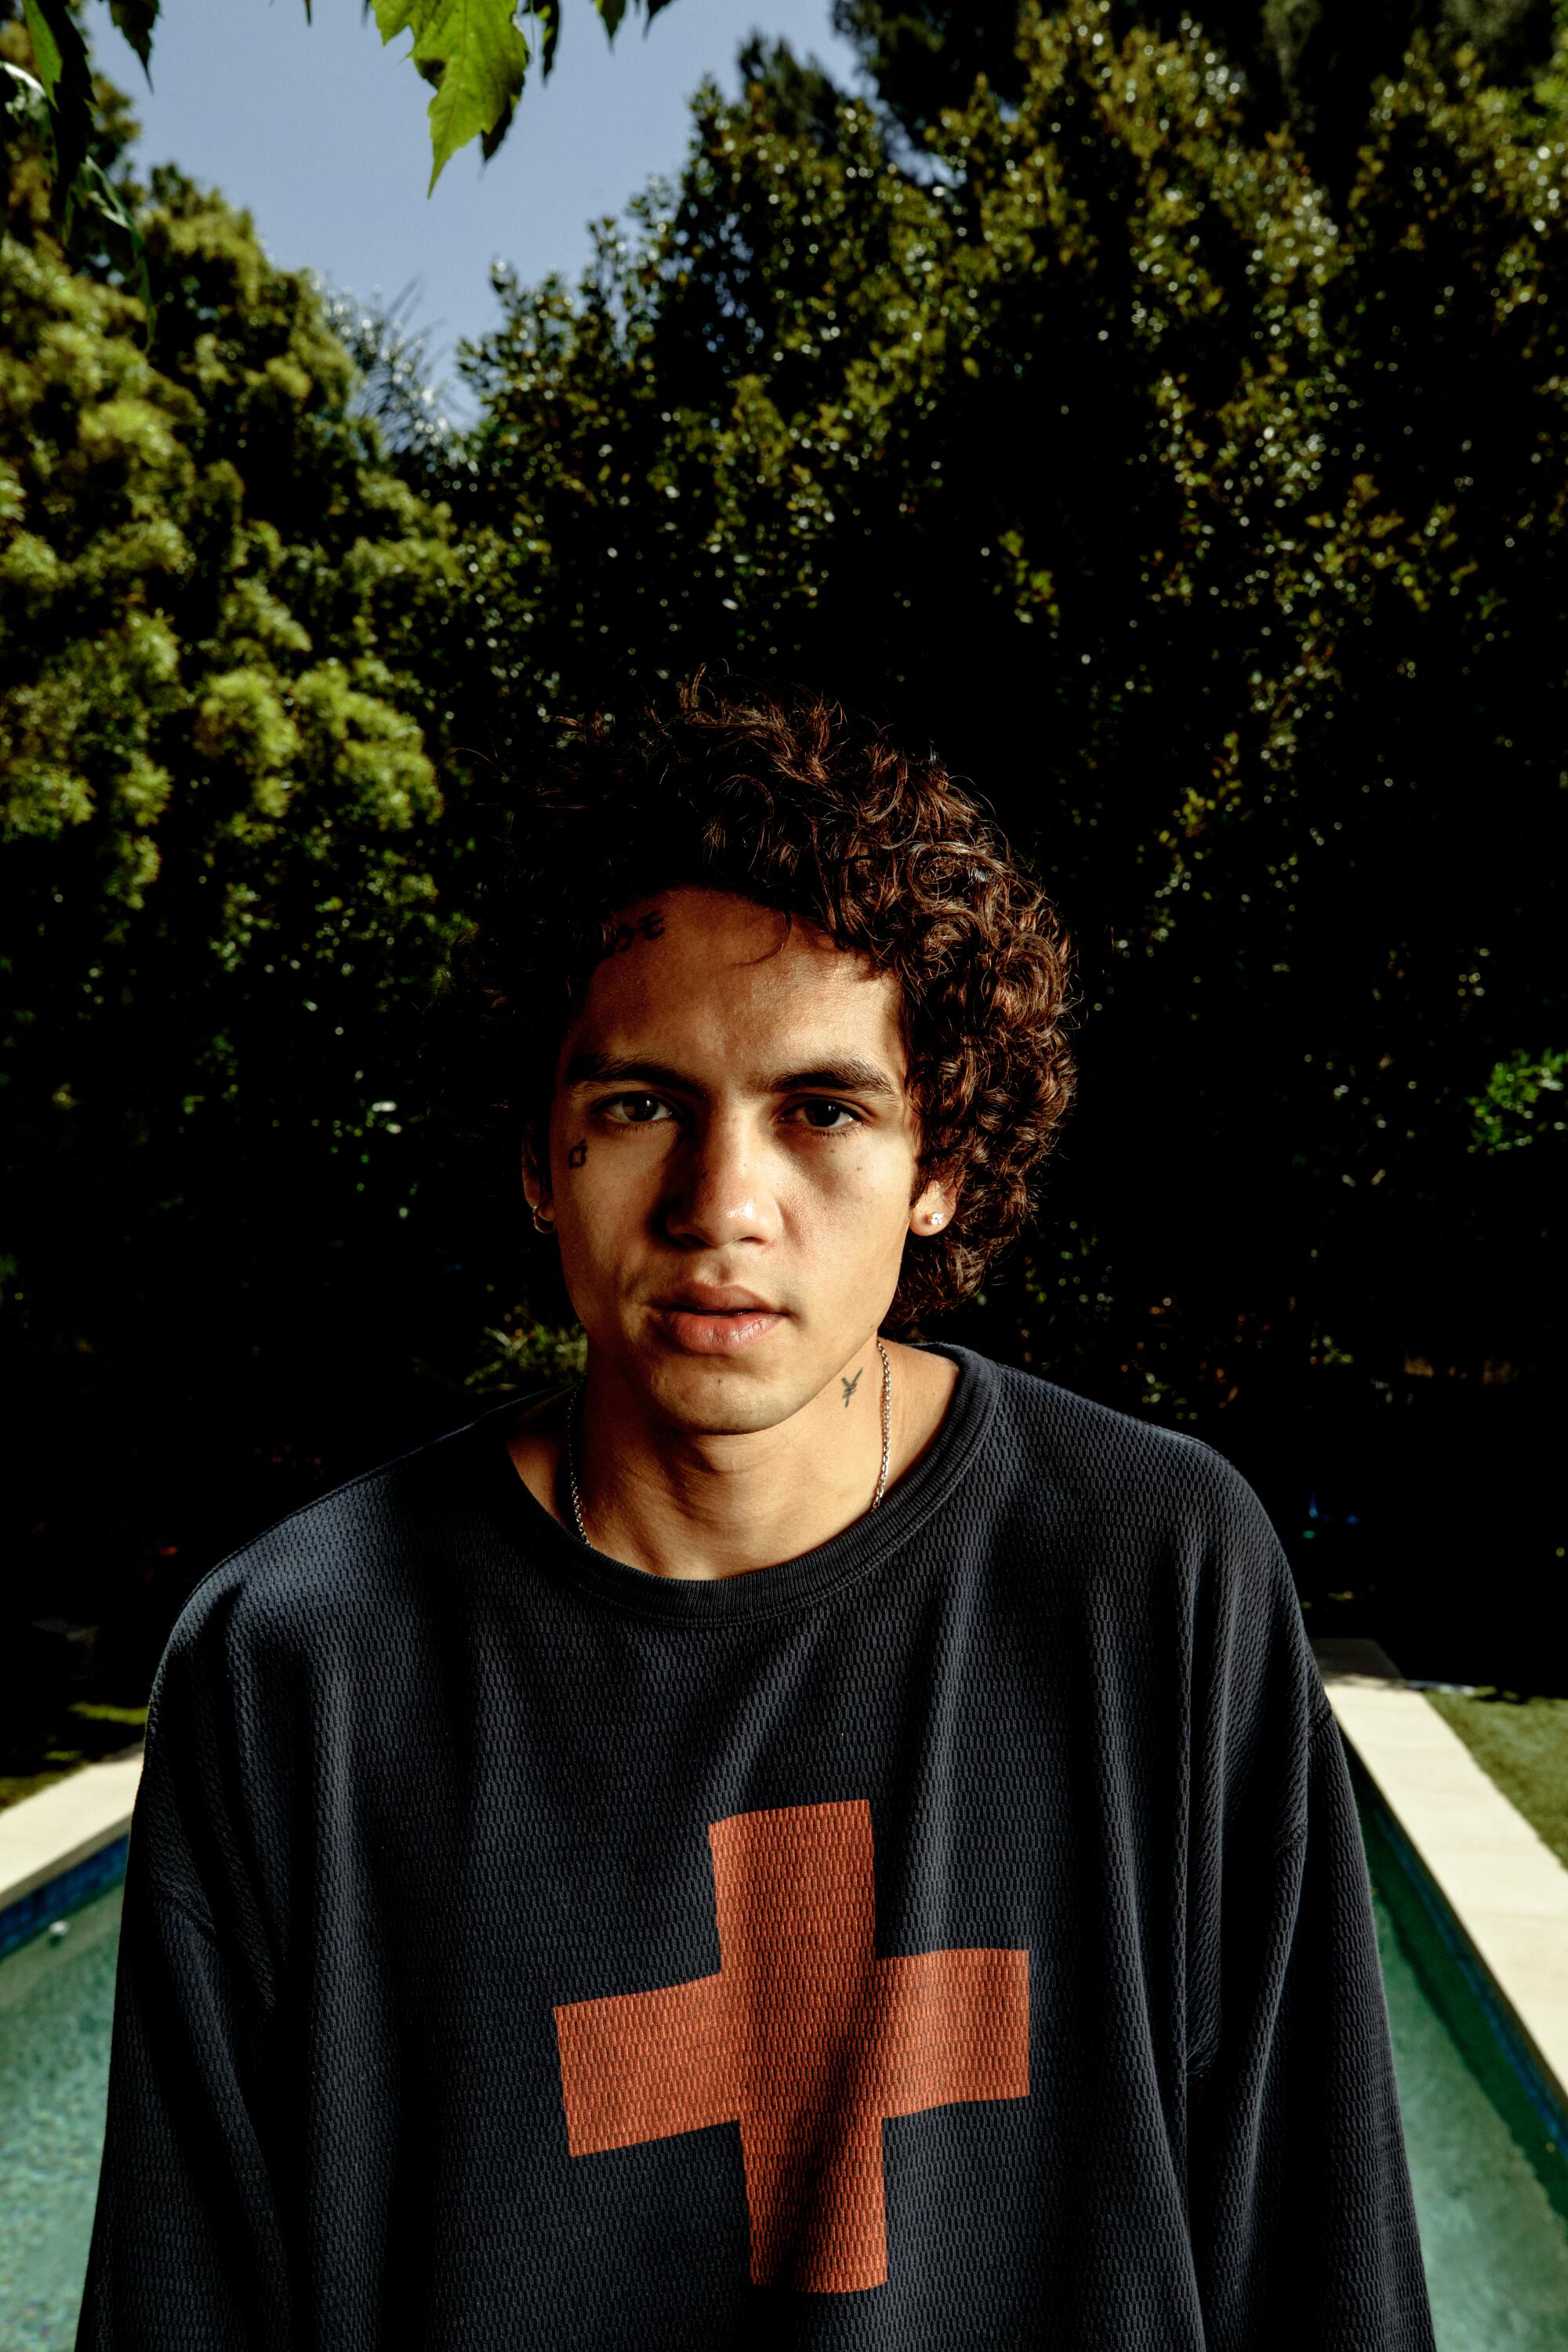 Dominic Fike in a black shirt with a red cross on it, outdoors with trees behind him